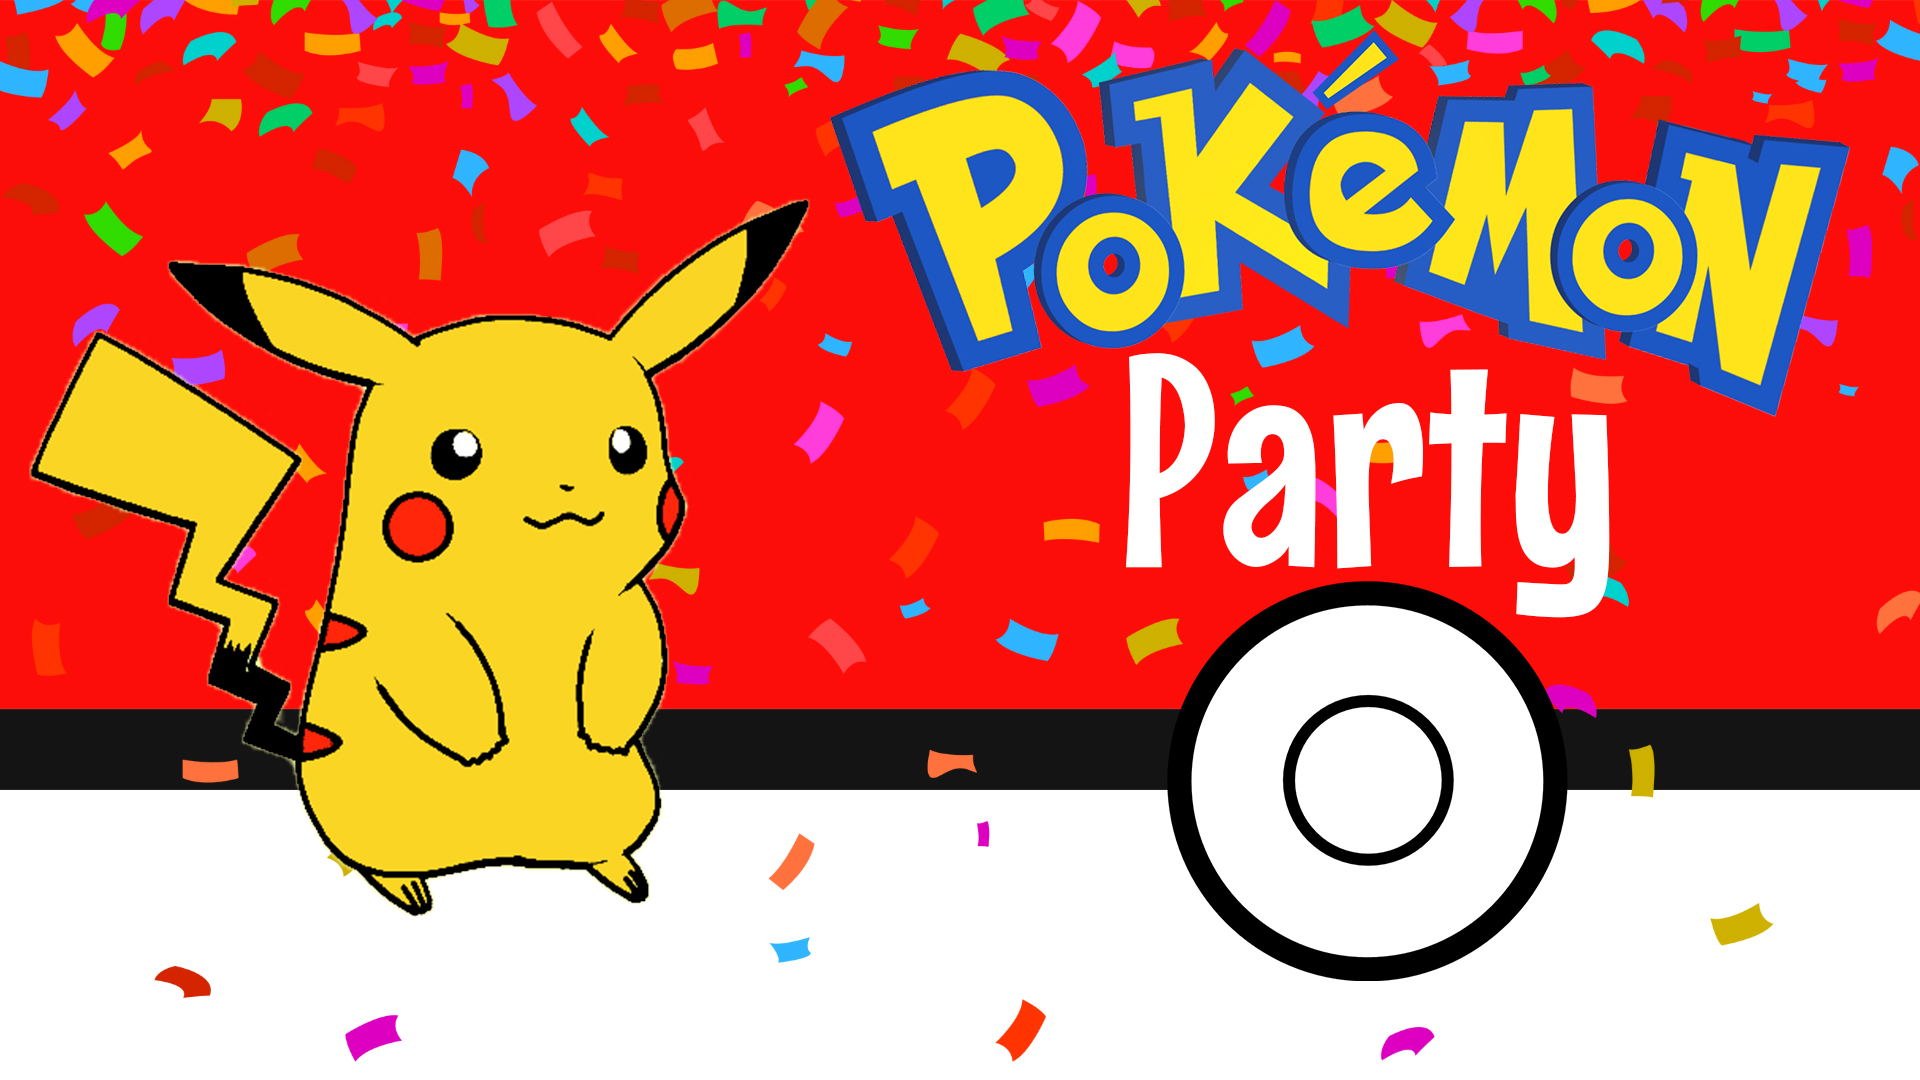 Image reads "Pokémon Party". Pikachu is to the left of the title and confetti is scattered among the image.